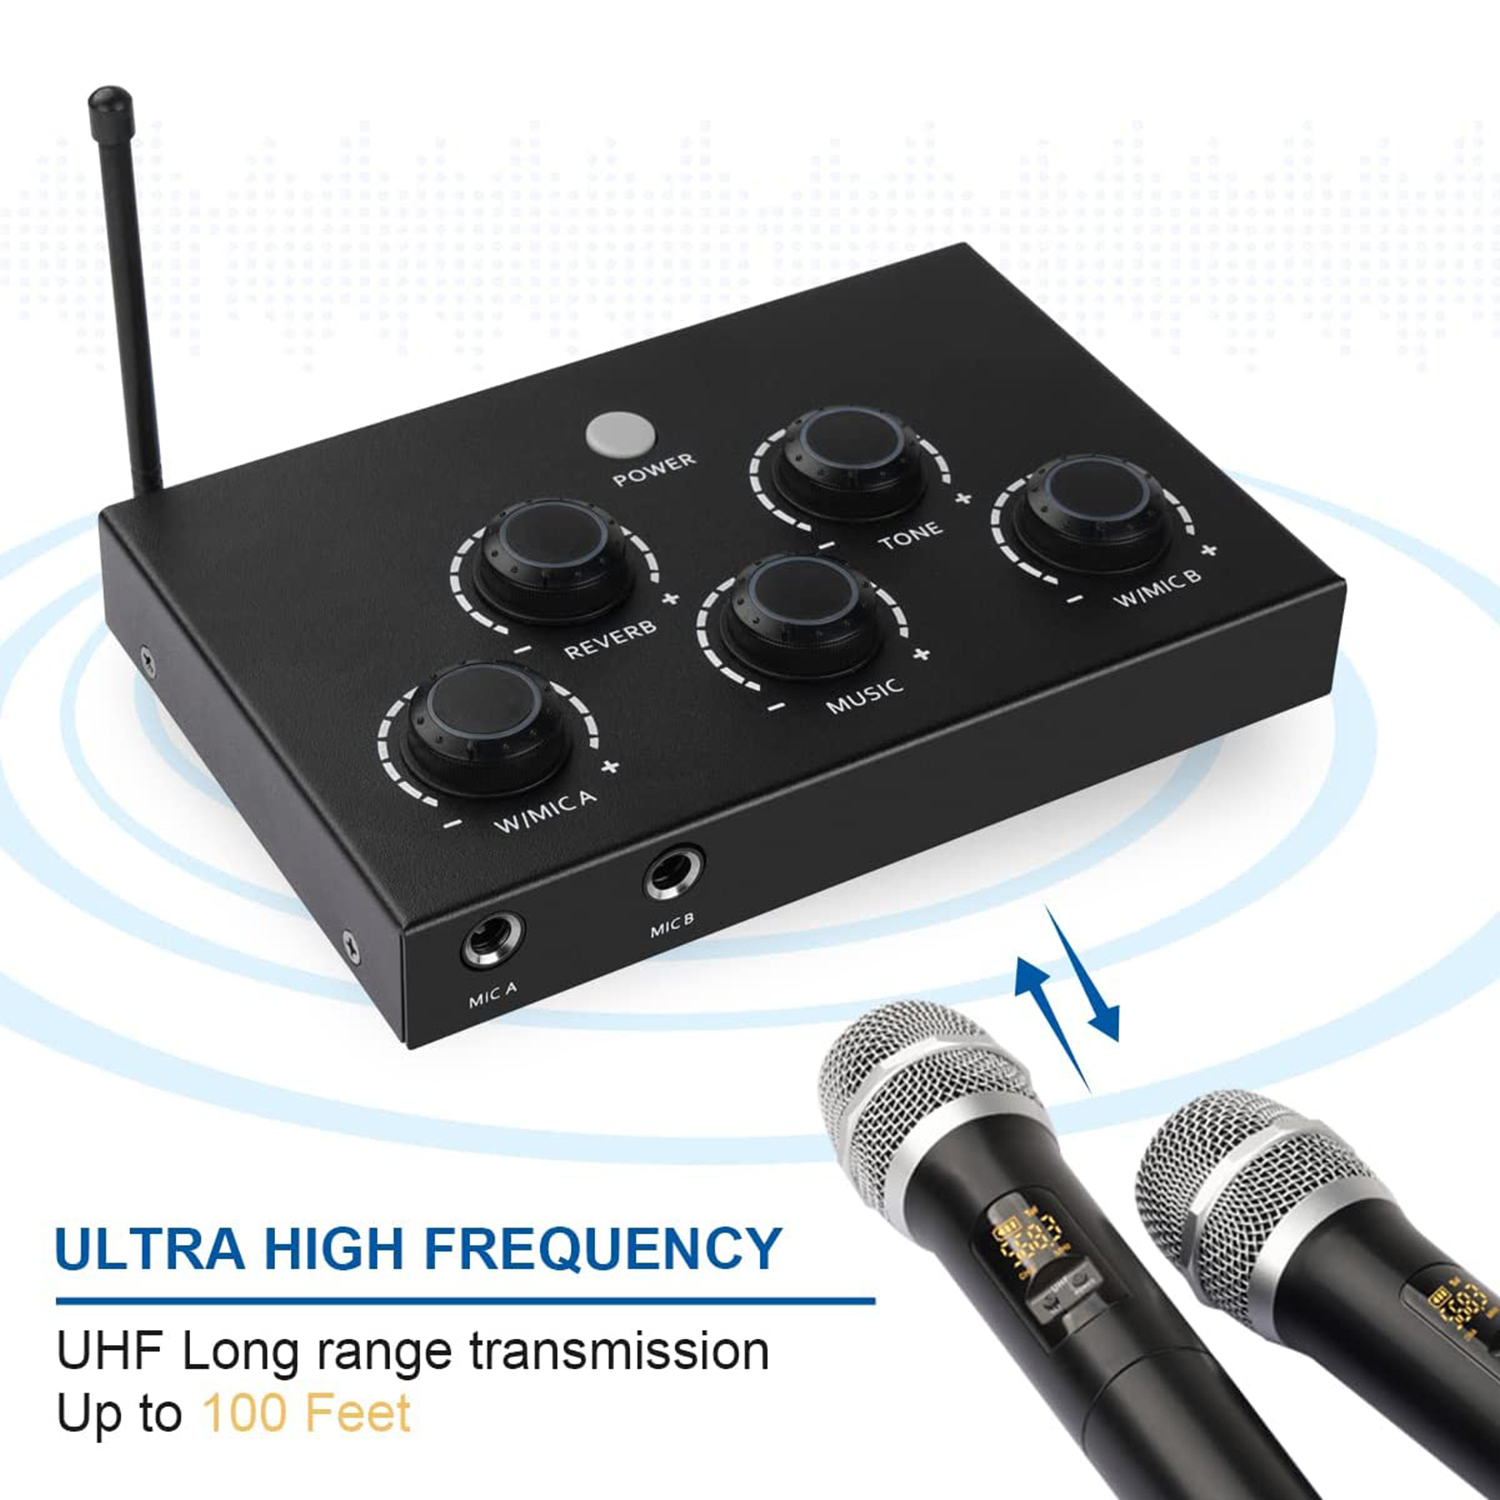 SWM15-PROS | Wireless Microphone Karaoke Mixer System w/ HD ARC, Optical,  AUX, Bluetooth, Selectable Frequencies - Supports Smart TV, Sound Bar,  Media